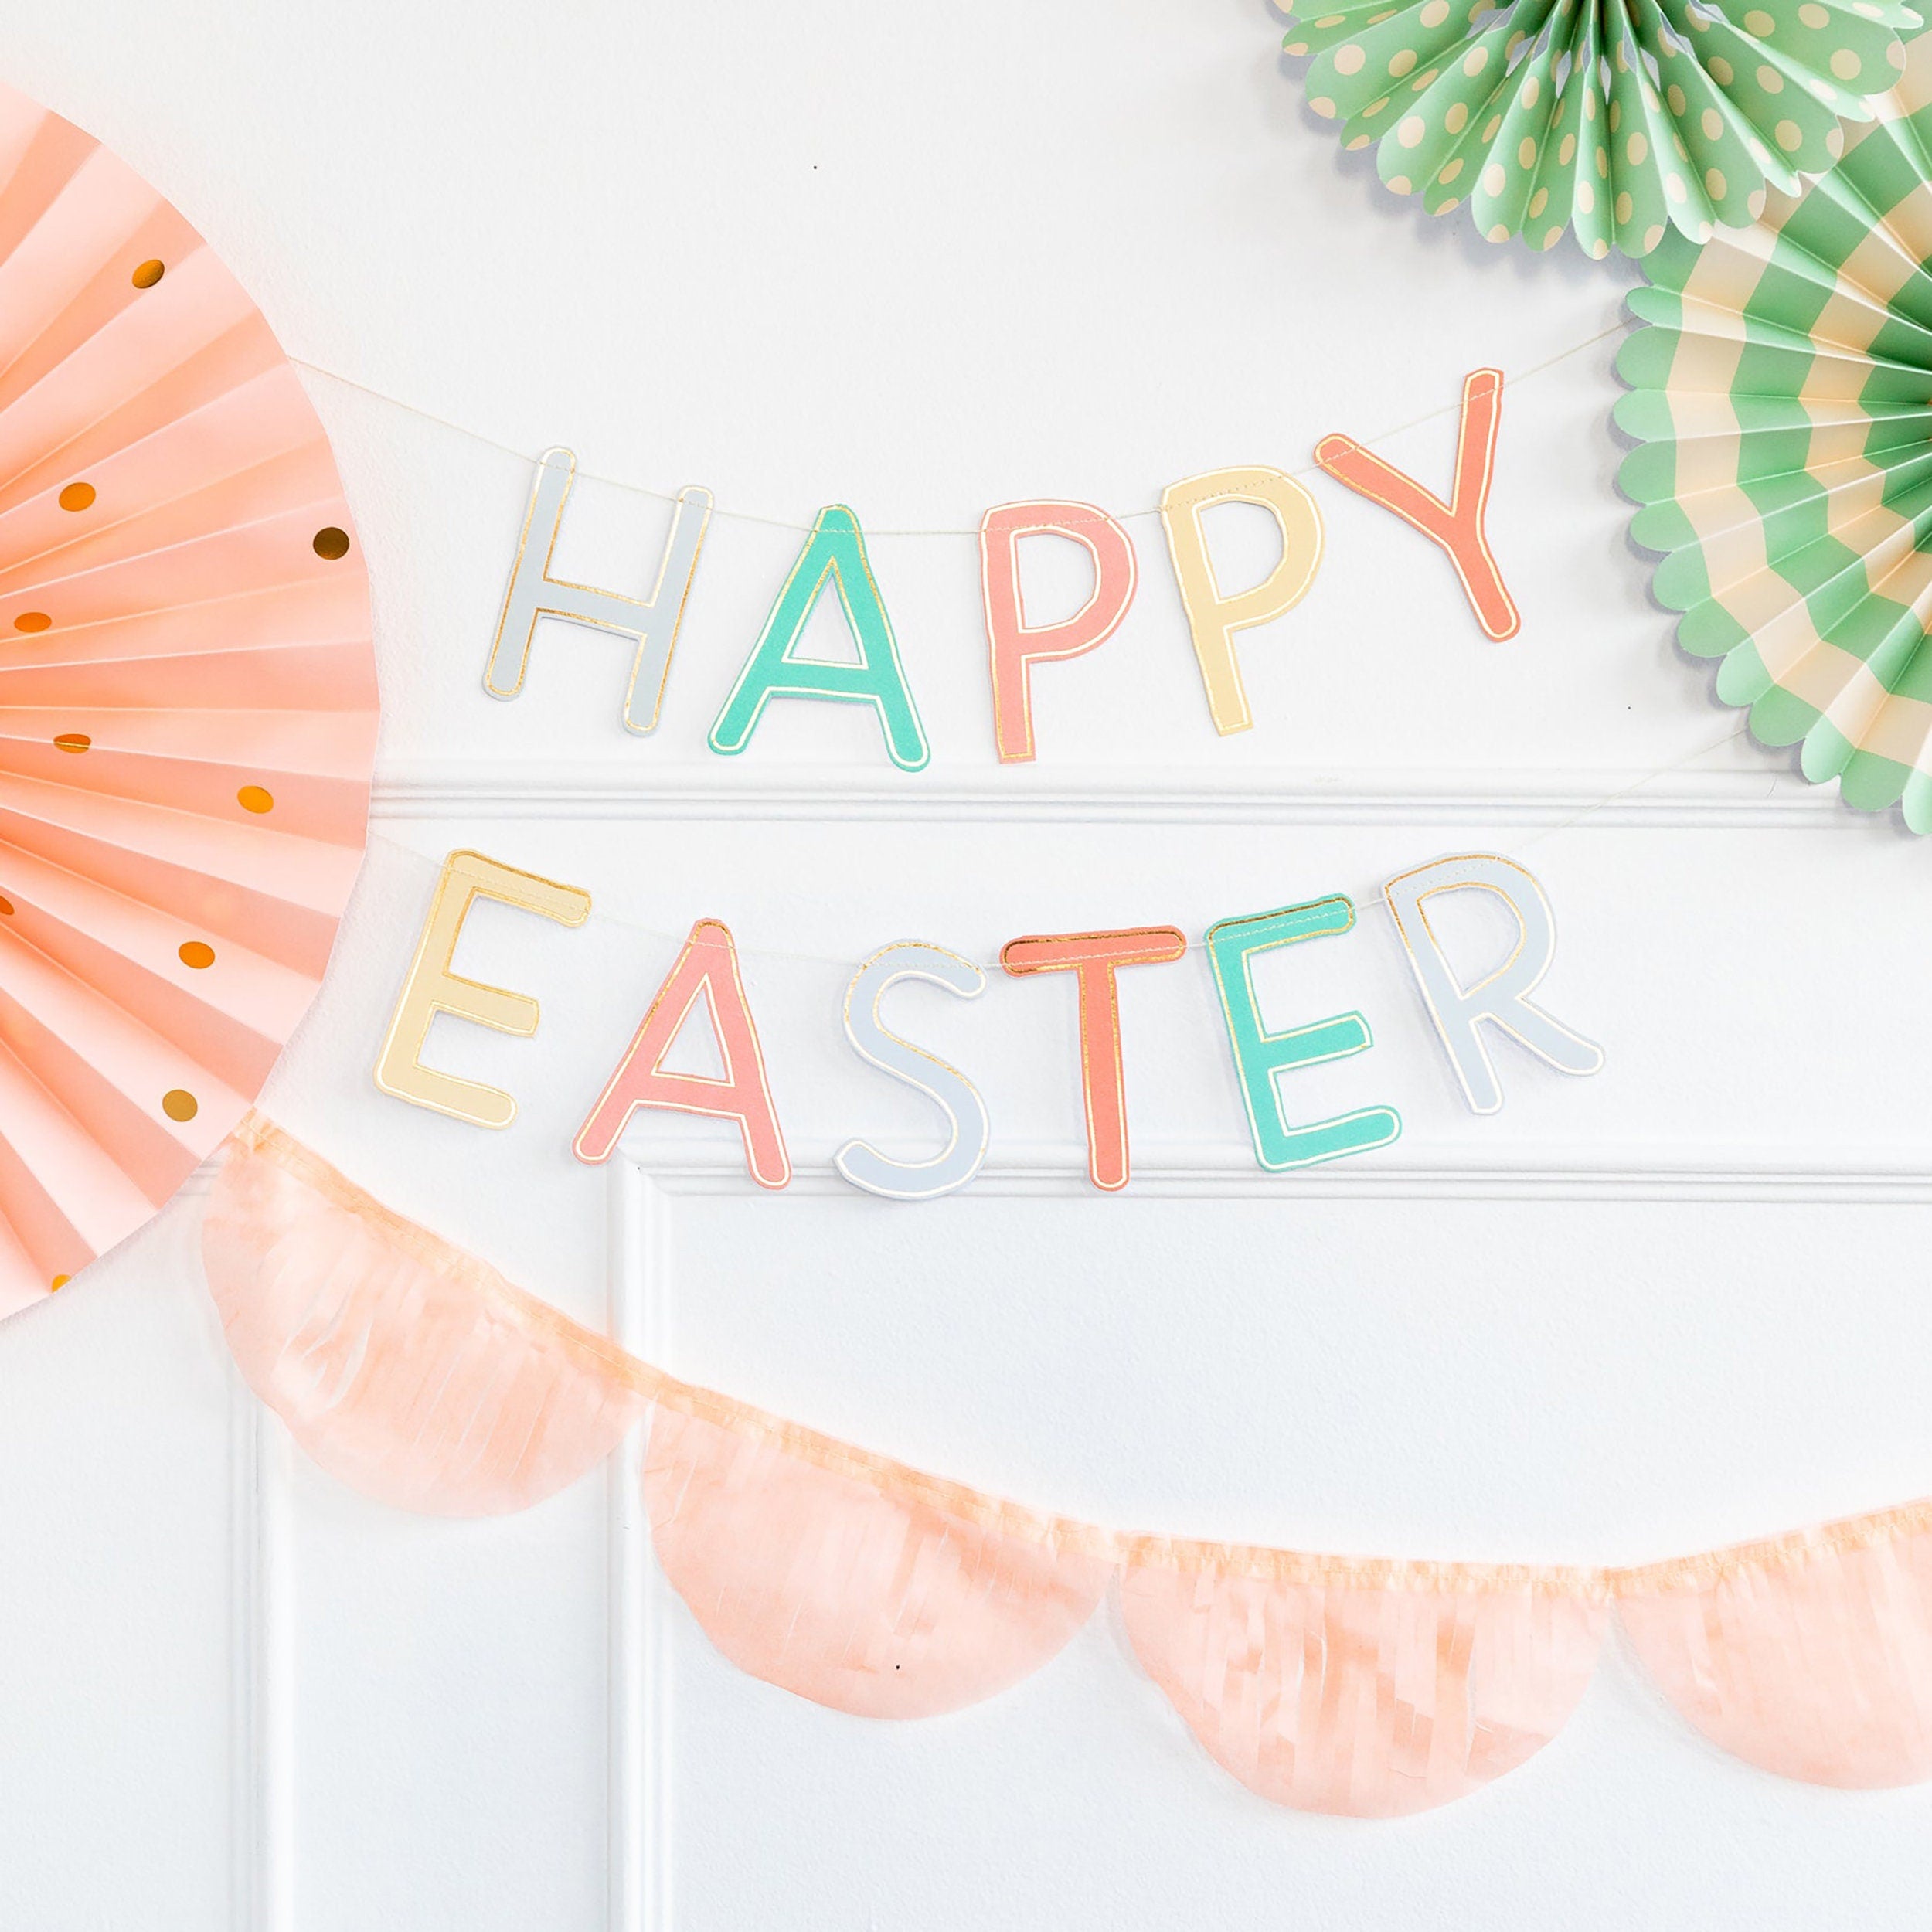 Happy Easter Banner | Easter Party Decorations - Easter Mantel Decor - Easter Party Supplies - Hanging Easter Decorations - Easter Banners